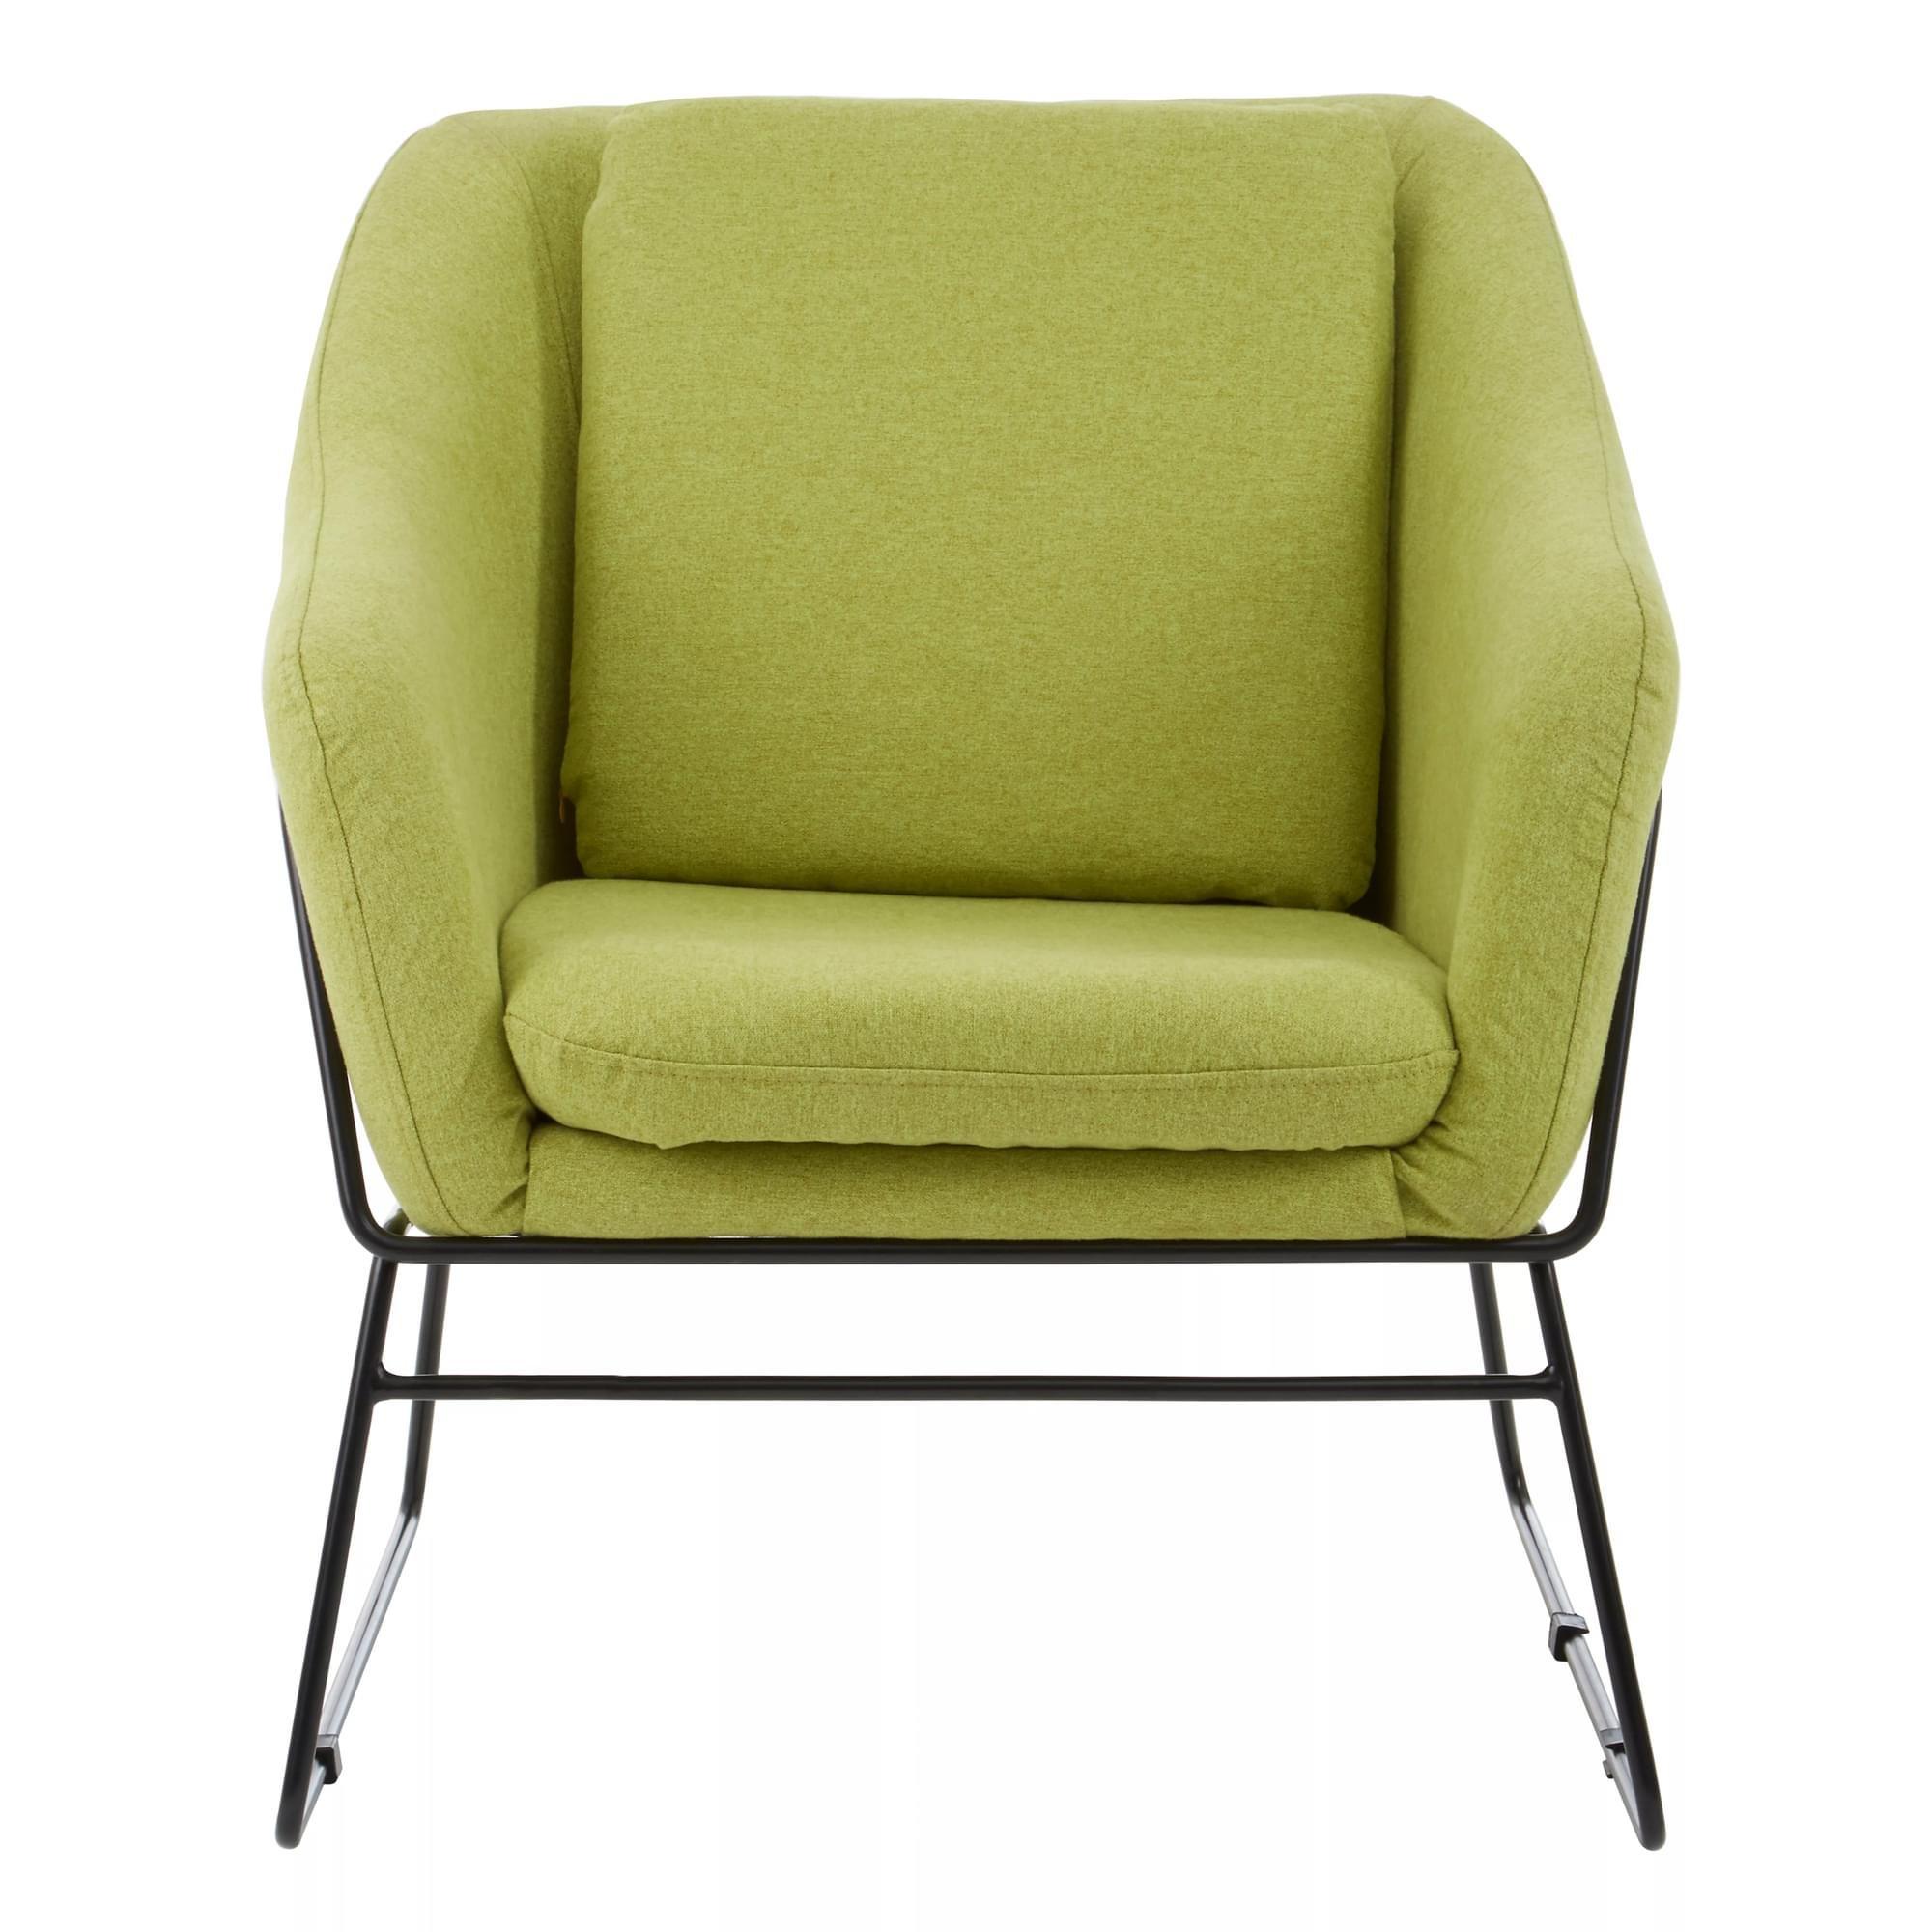 Interiors by Premier Stockholm Green Chair